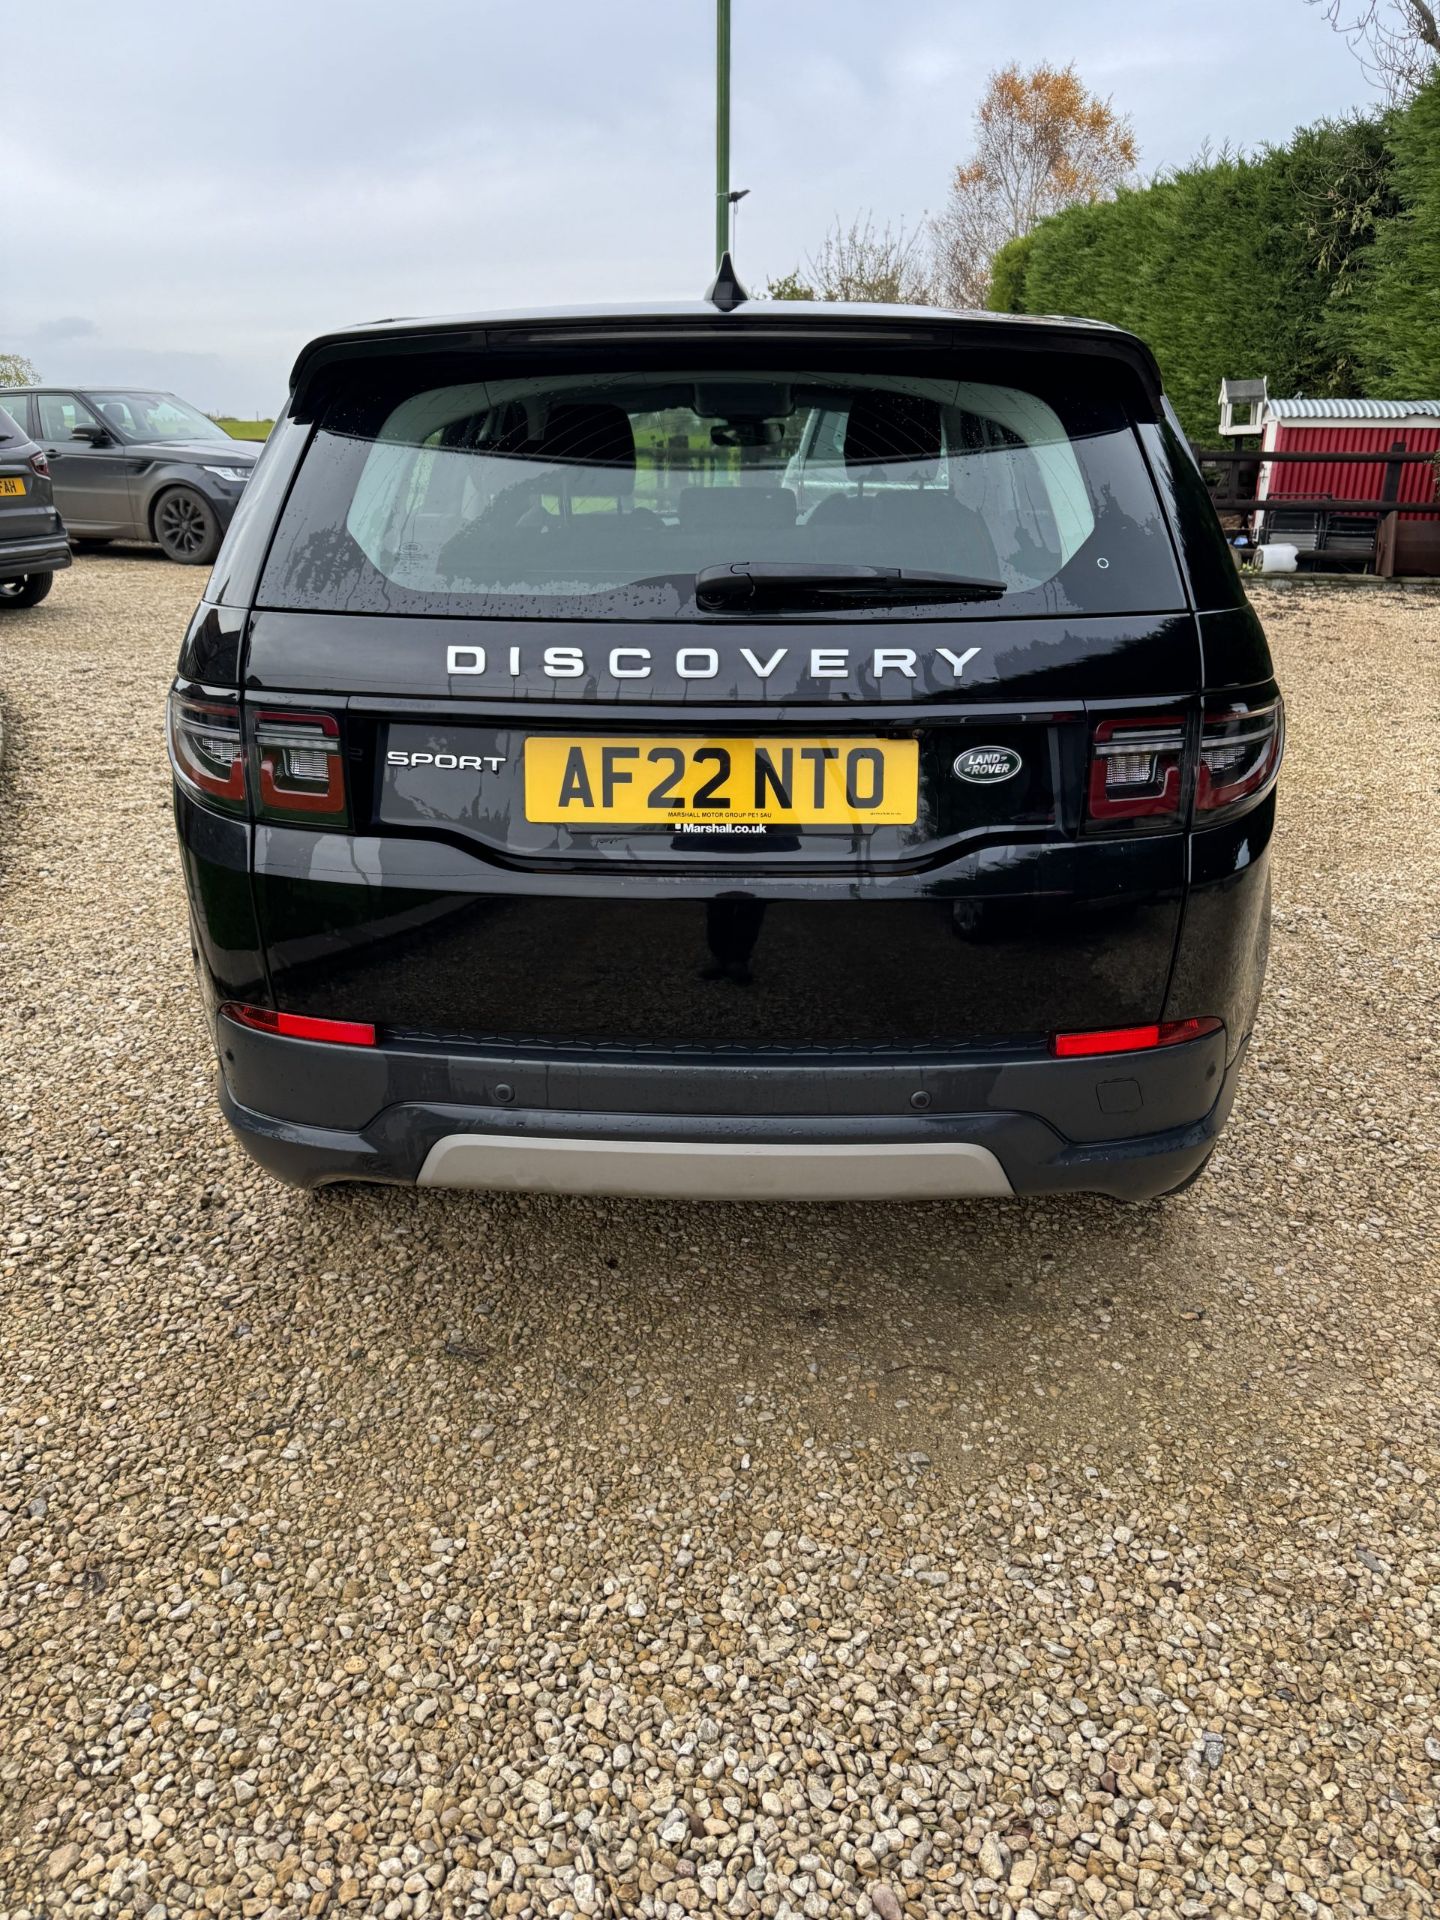 2022 LANDROVER DISCOVERY SPORT - Image 4 of 9